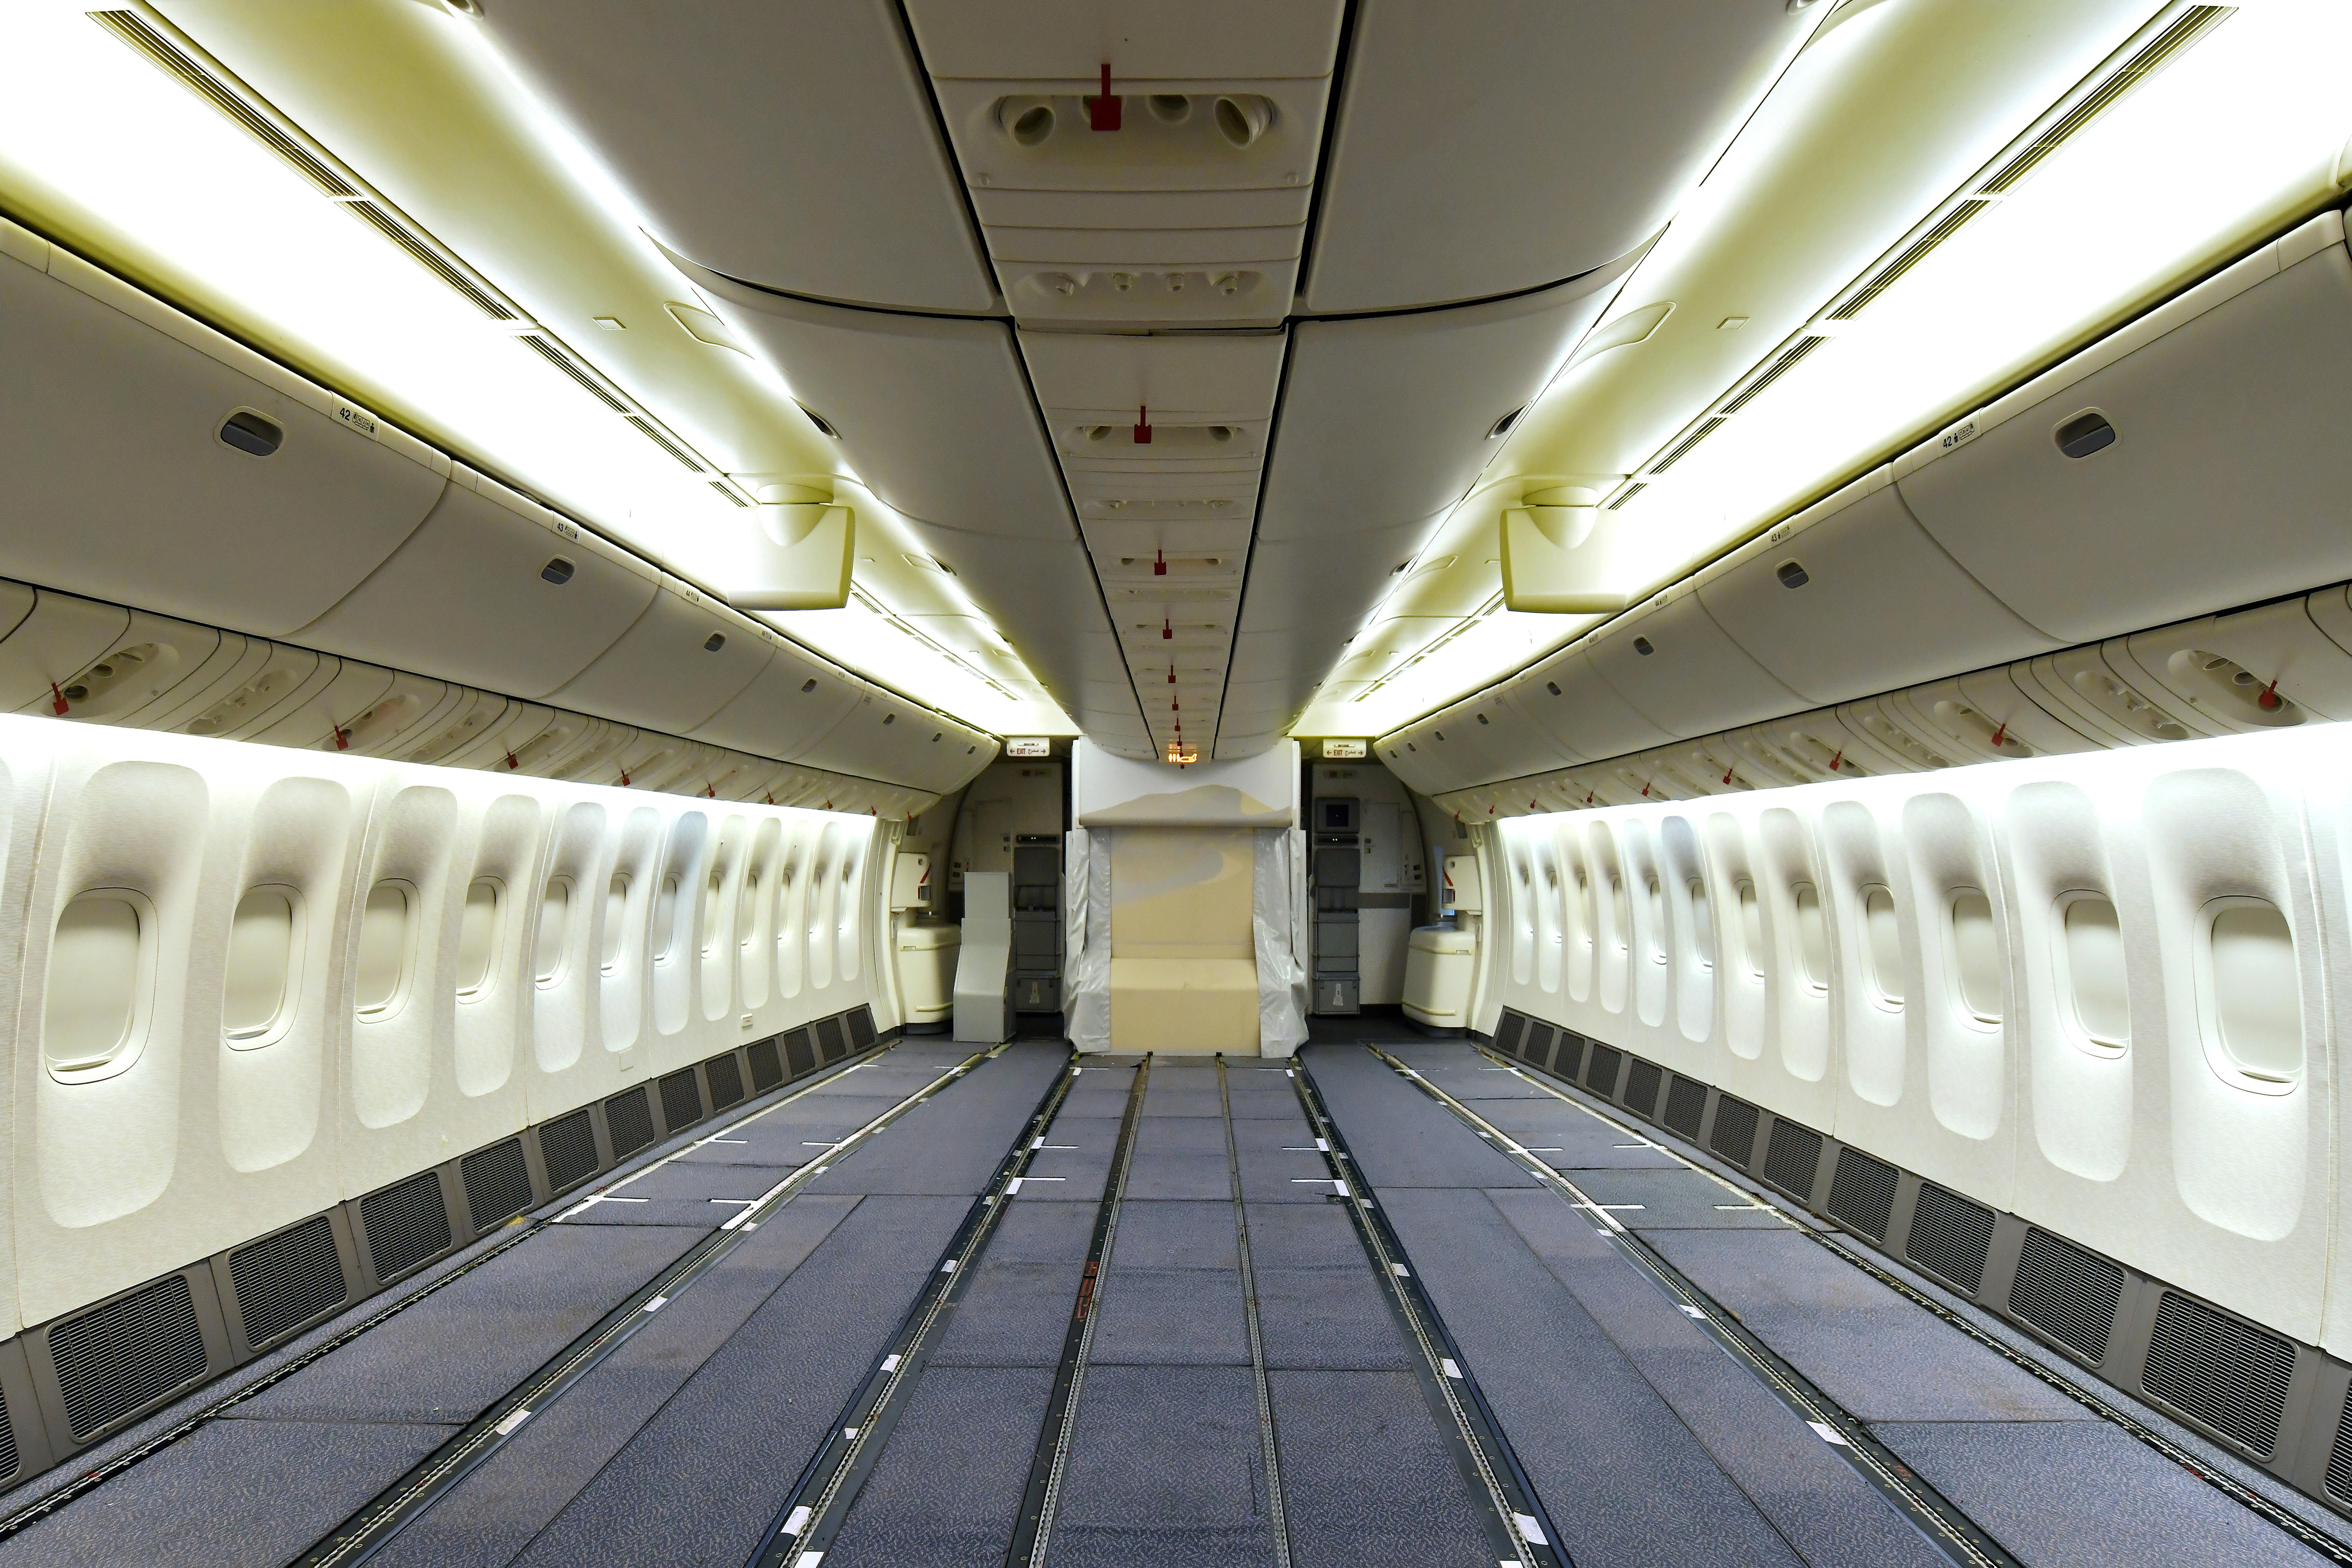 A general view of an Emirates Airlines' Boeing 777-300ER aircraft being modified to provide additional cargo capacity with seats removed from the economy class cabin, following the outbreak of the coronavirus disease (COVID-19), in Dubai